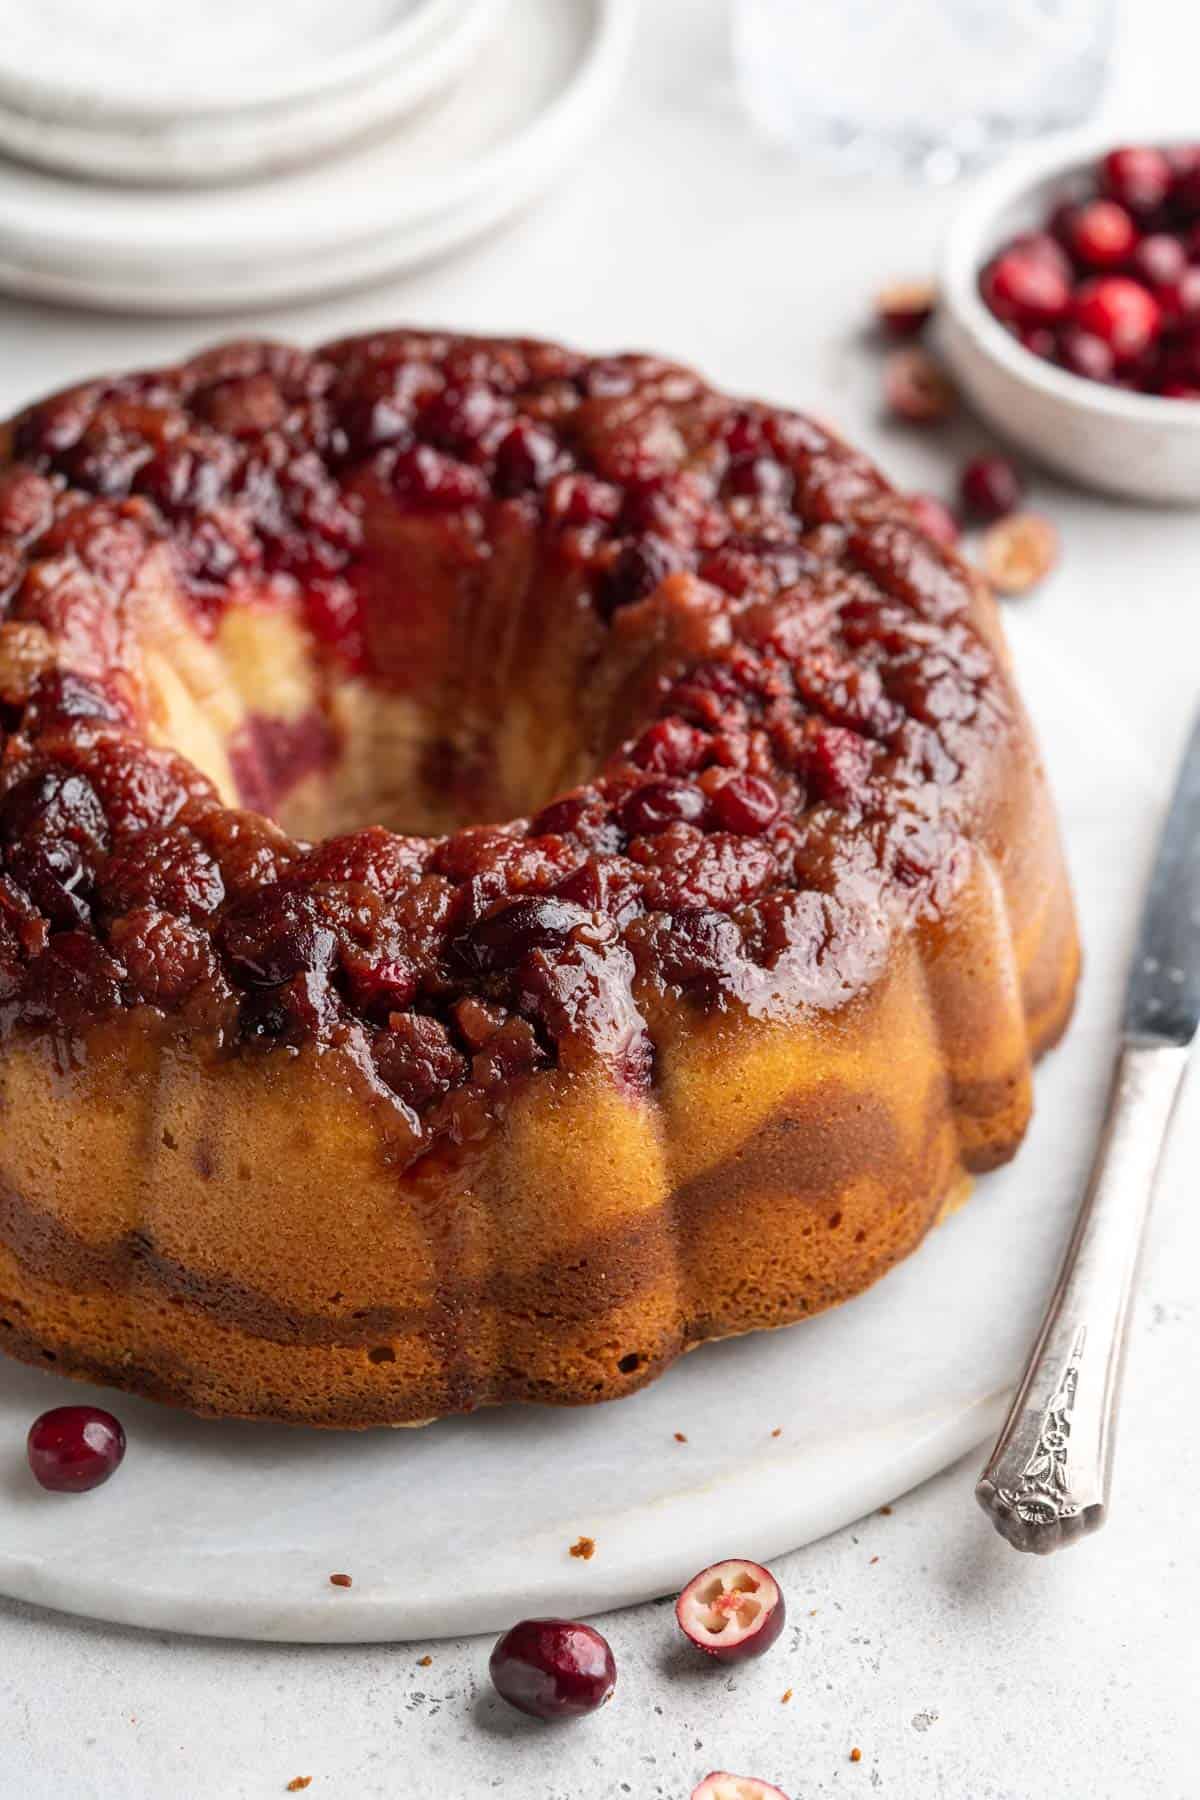 A cranberry pound cake on a platter with a little bowl of cranberries and stack of plates to the side.